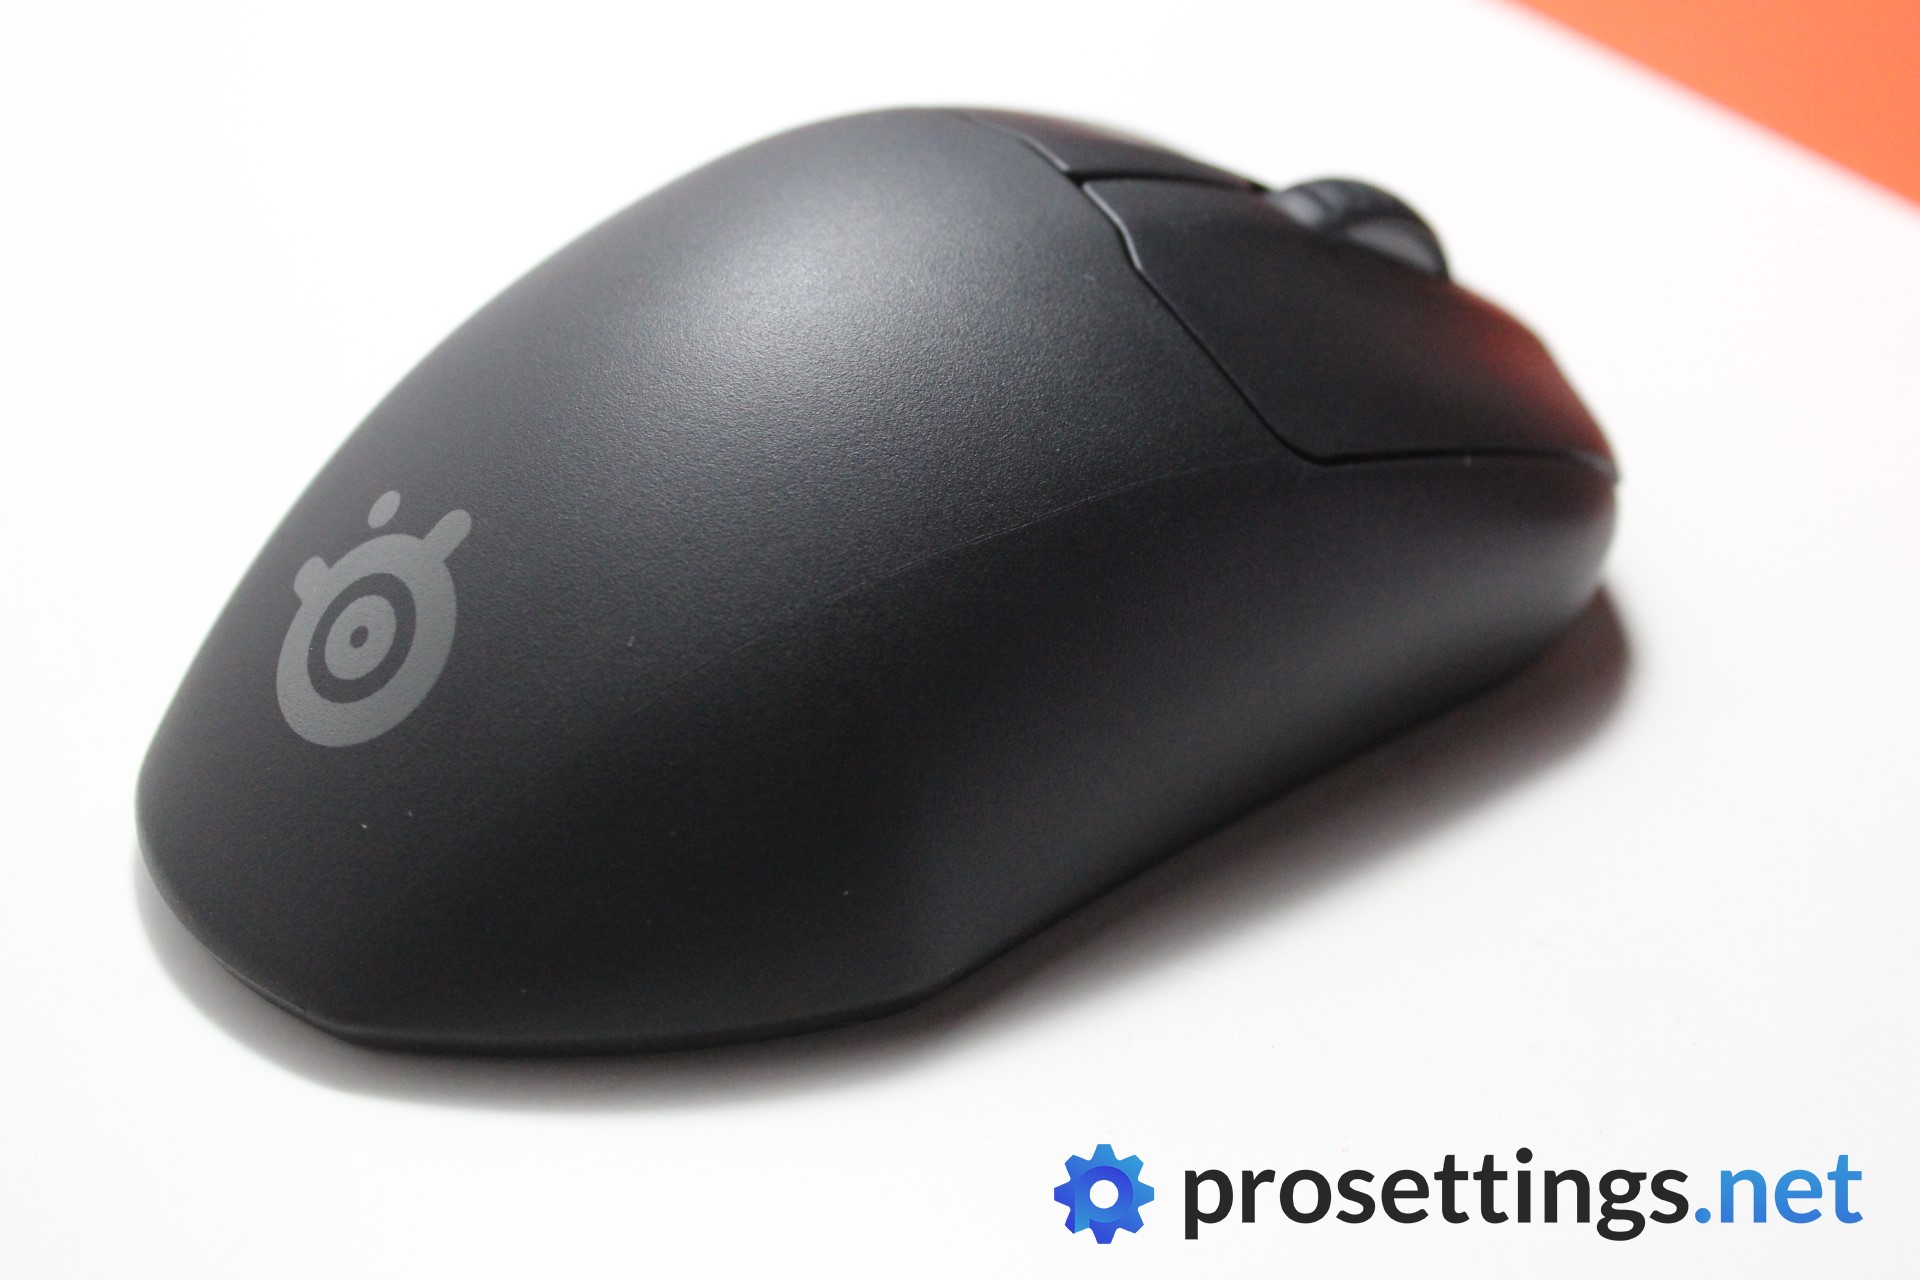 SteelSeries Prime Wireless Review